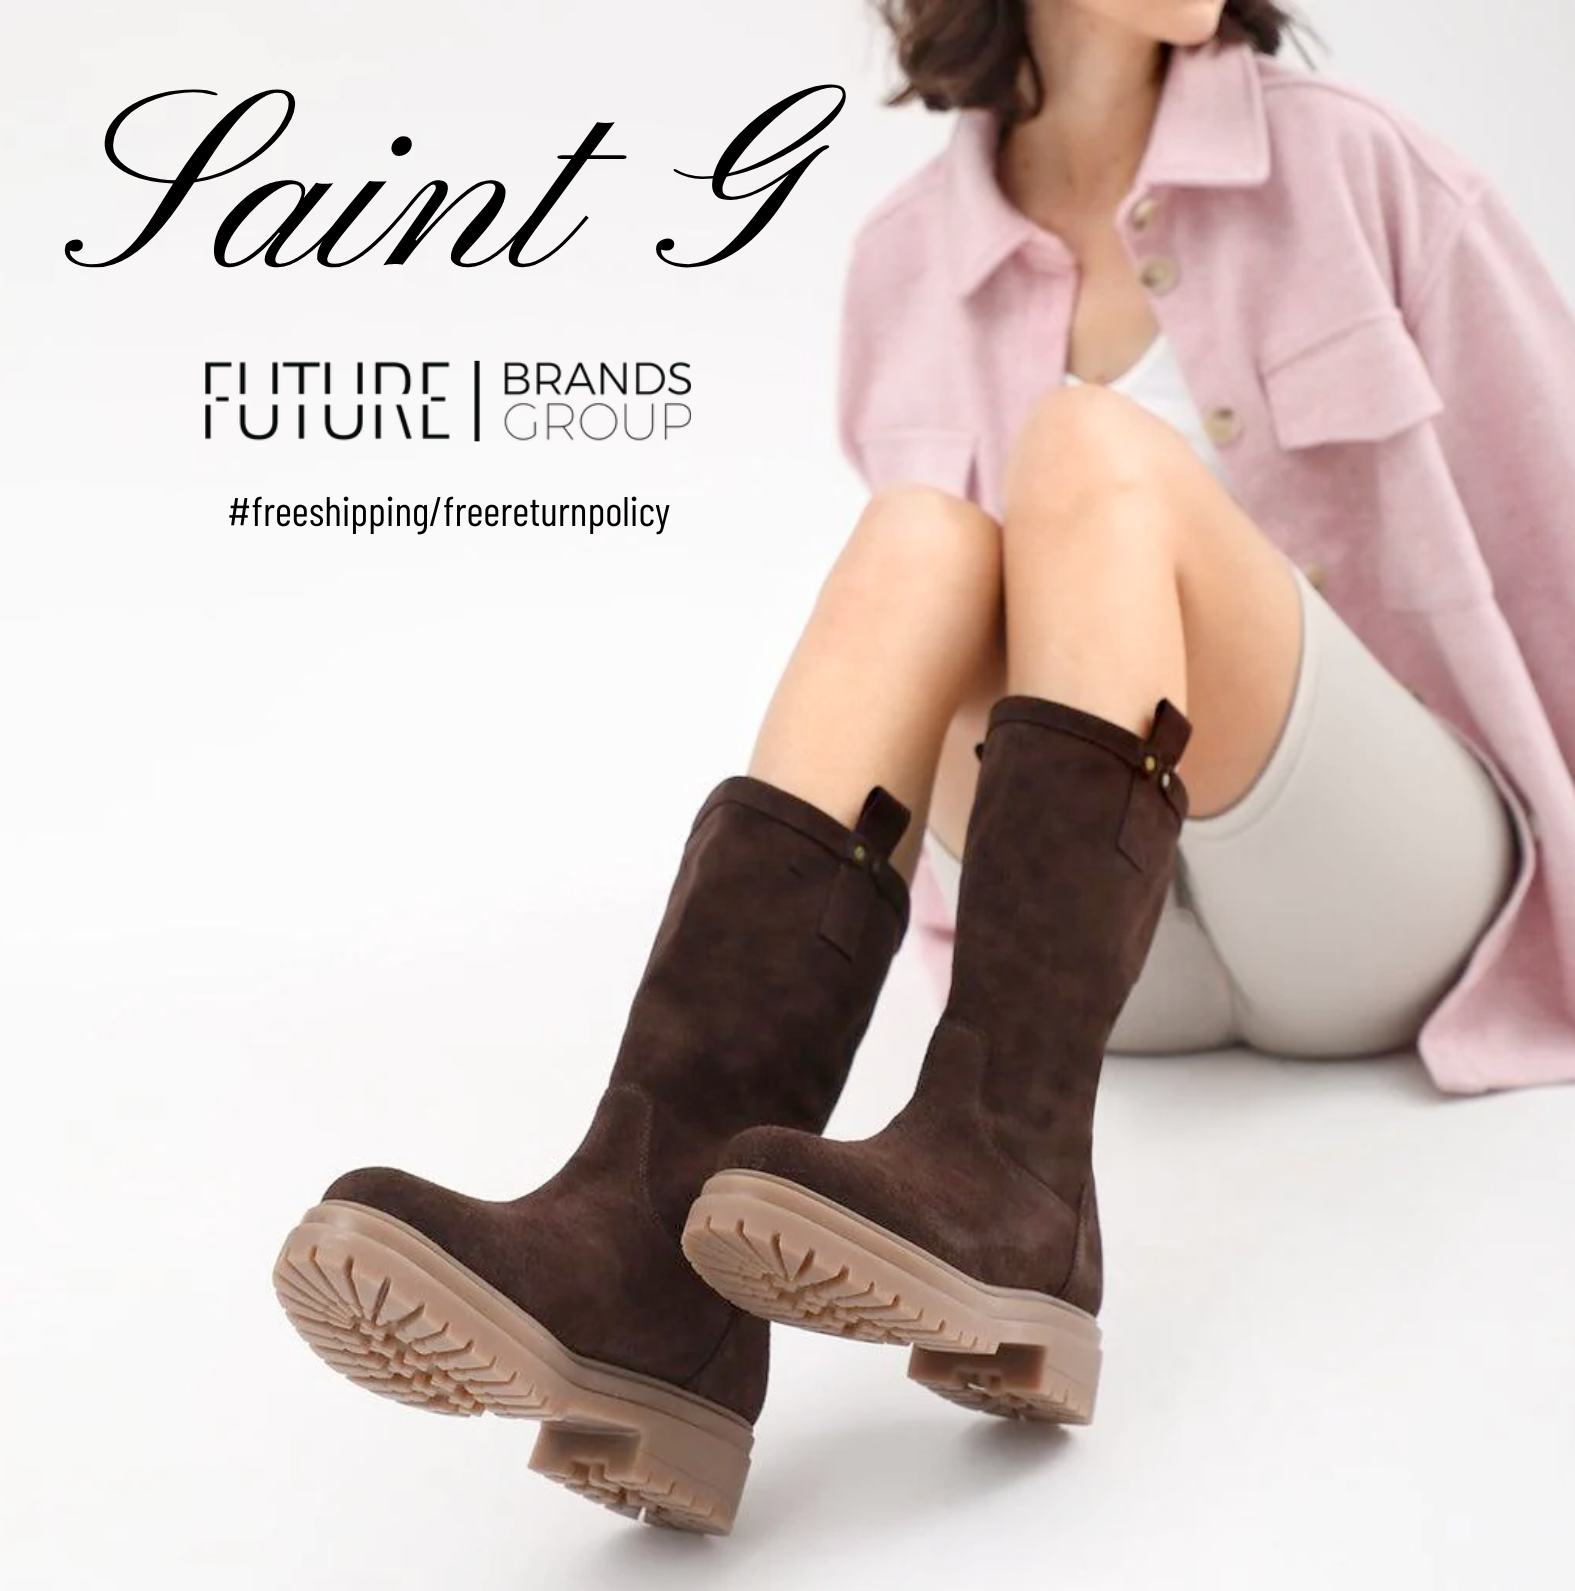 Alexandra Cuoio Suede Pull on Boots | Jelavu | Future Brands Group